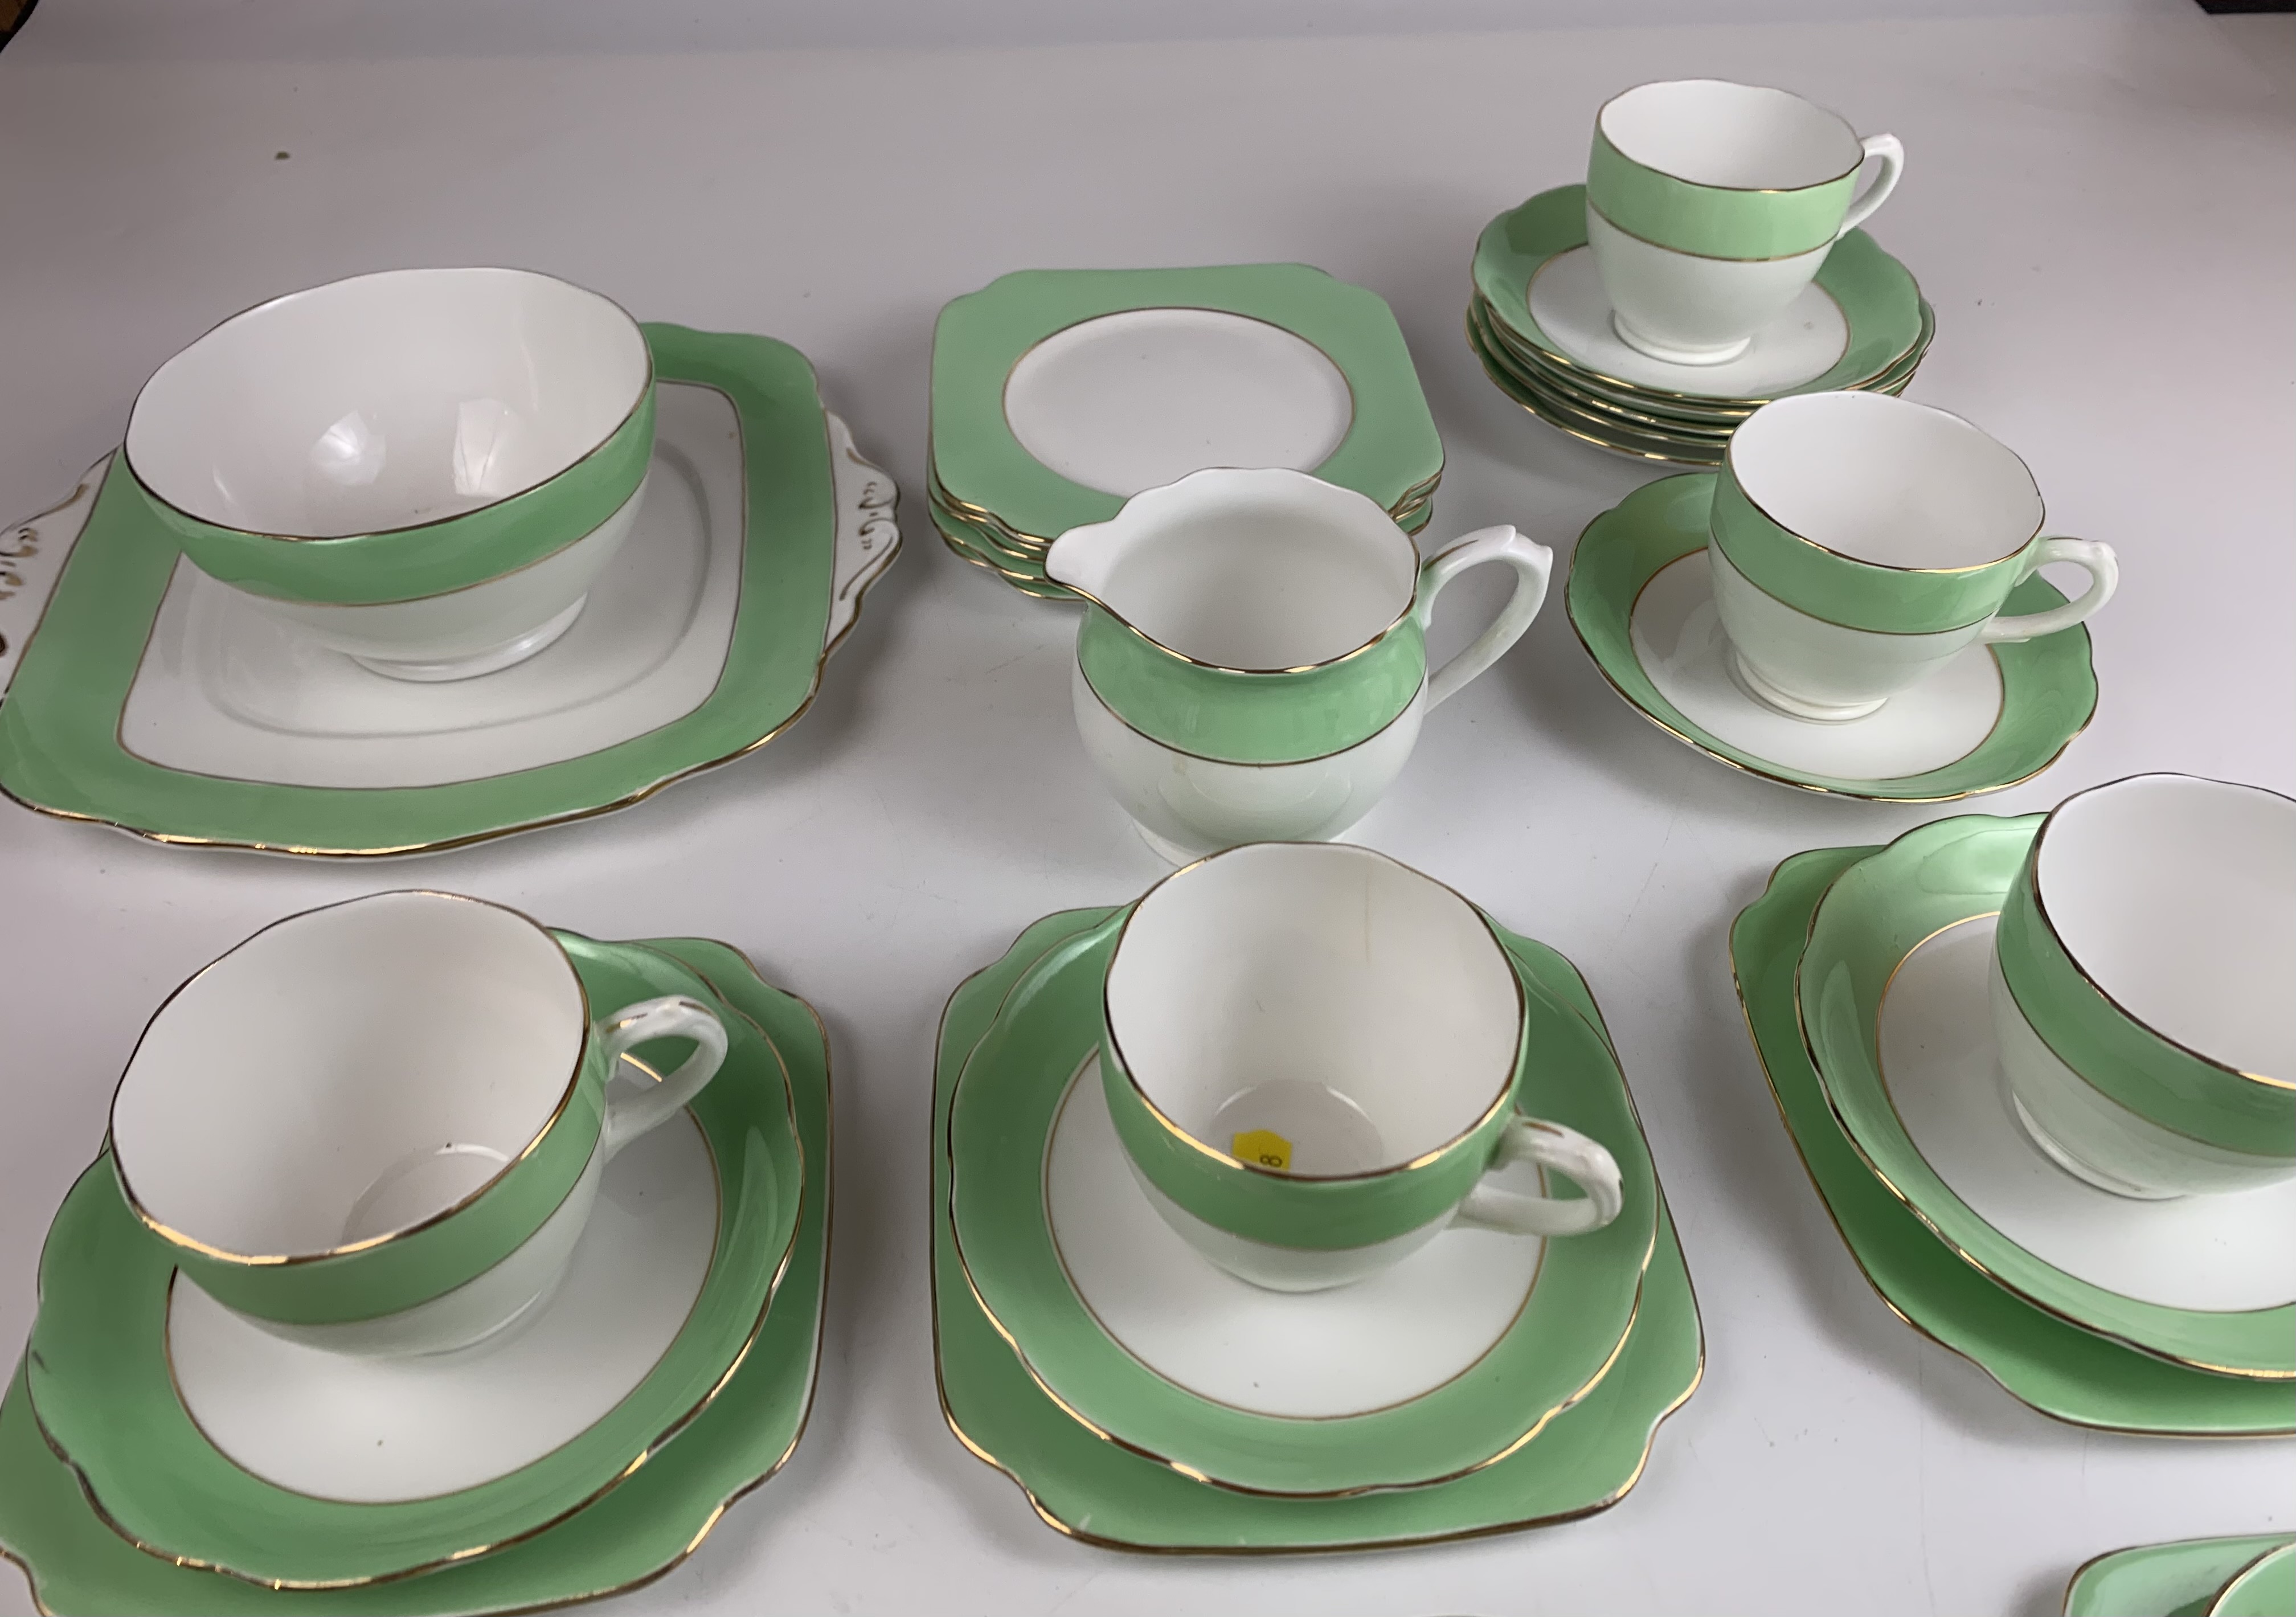 34 piece English Bone China tea service comprising 8 cups, 12 saucers, 11 side plates, 1 sandwich - Image 3 of 4